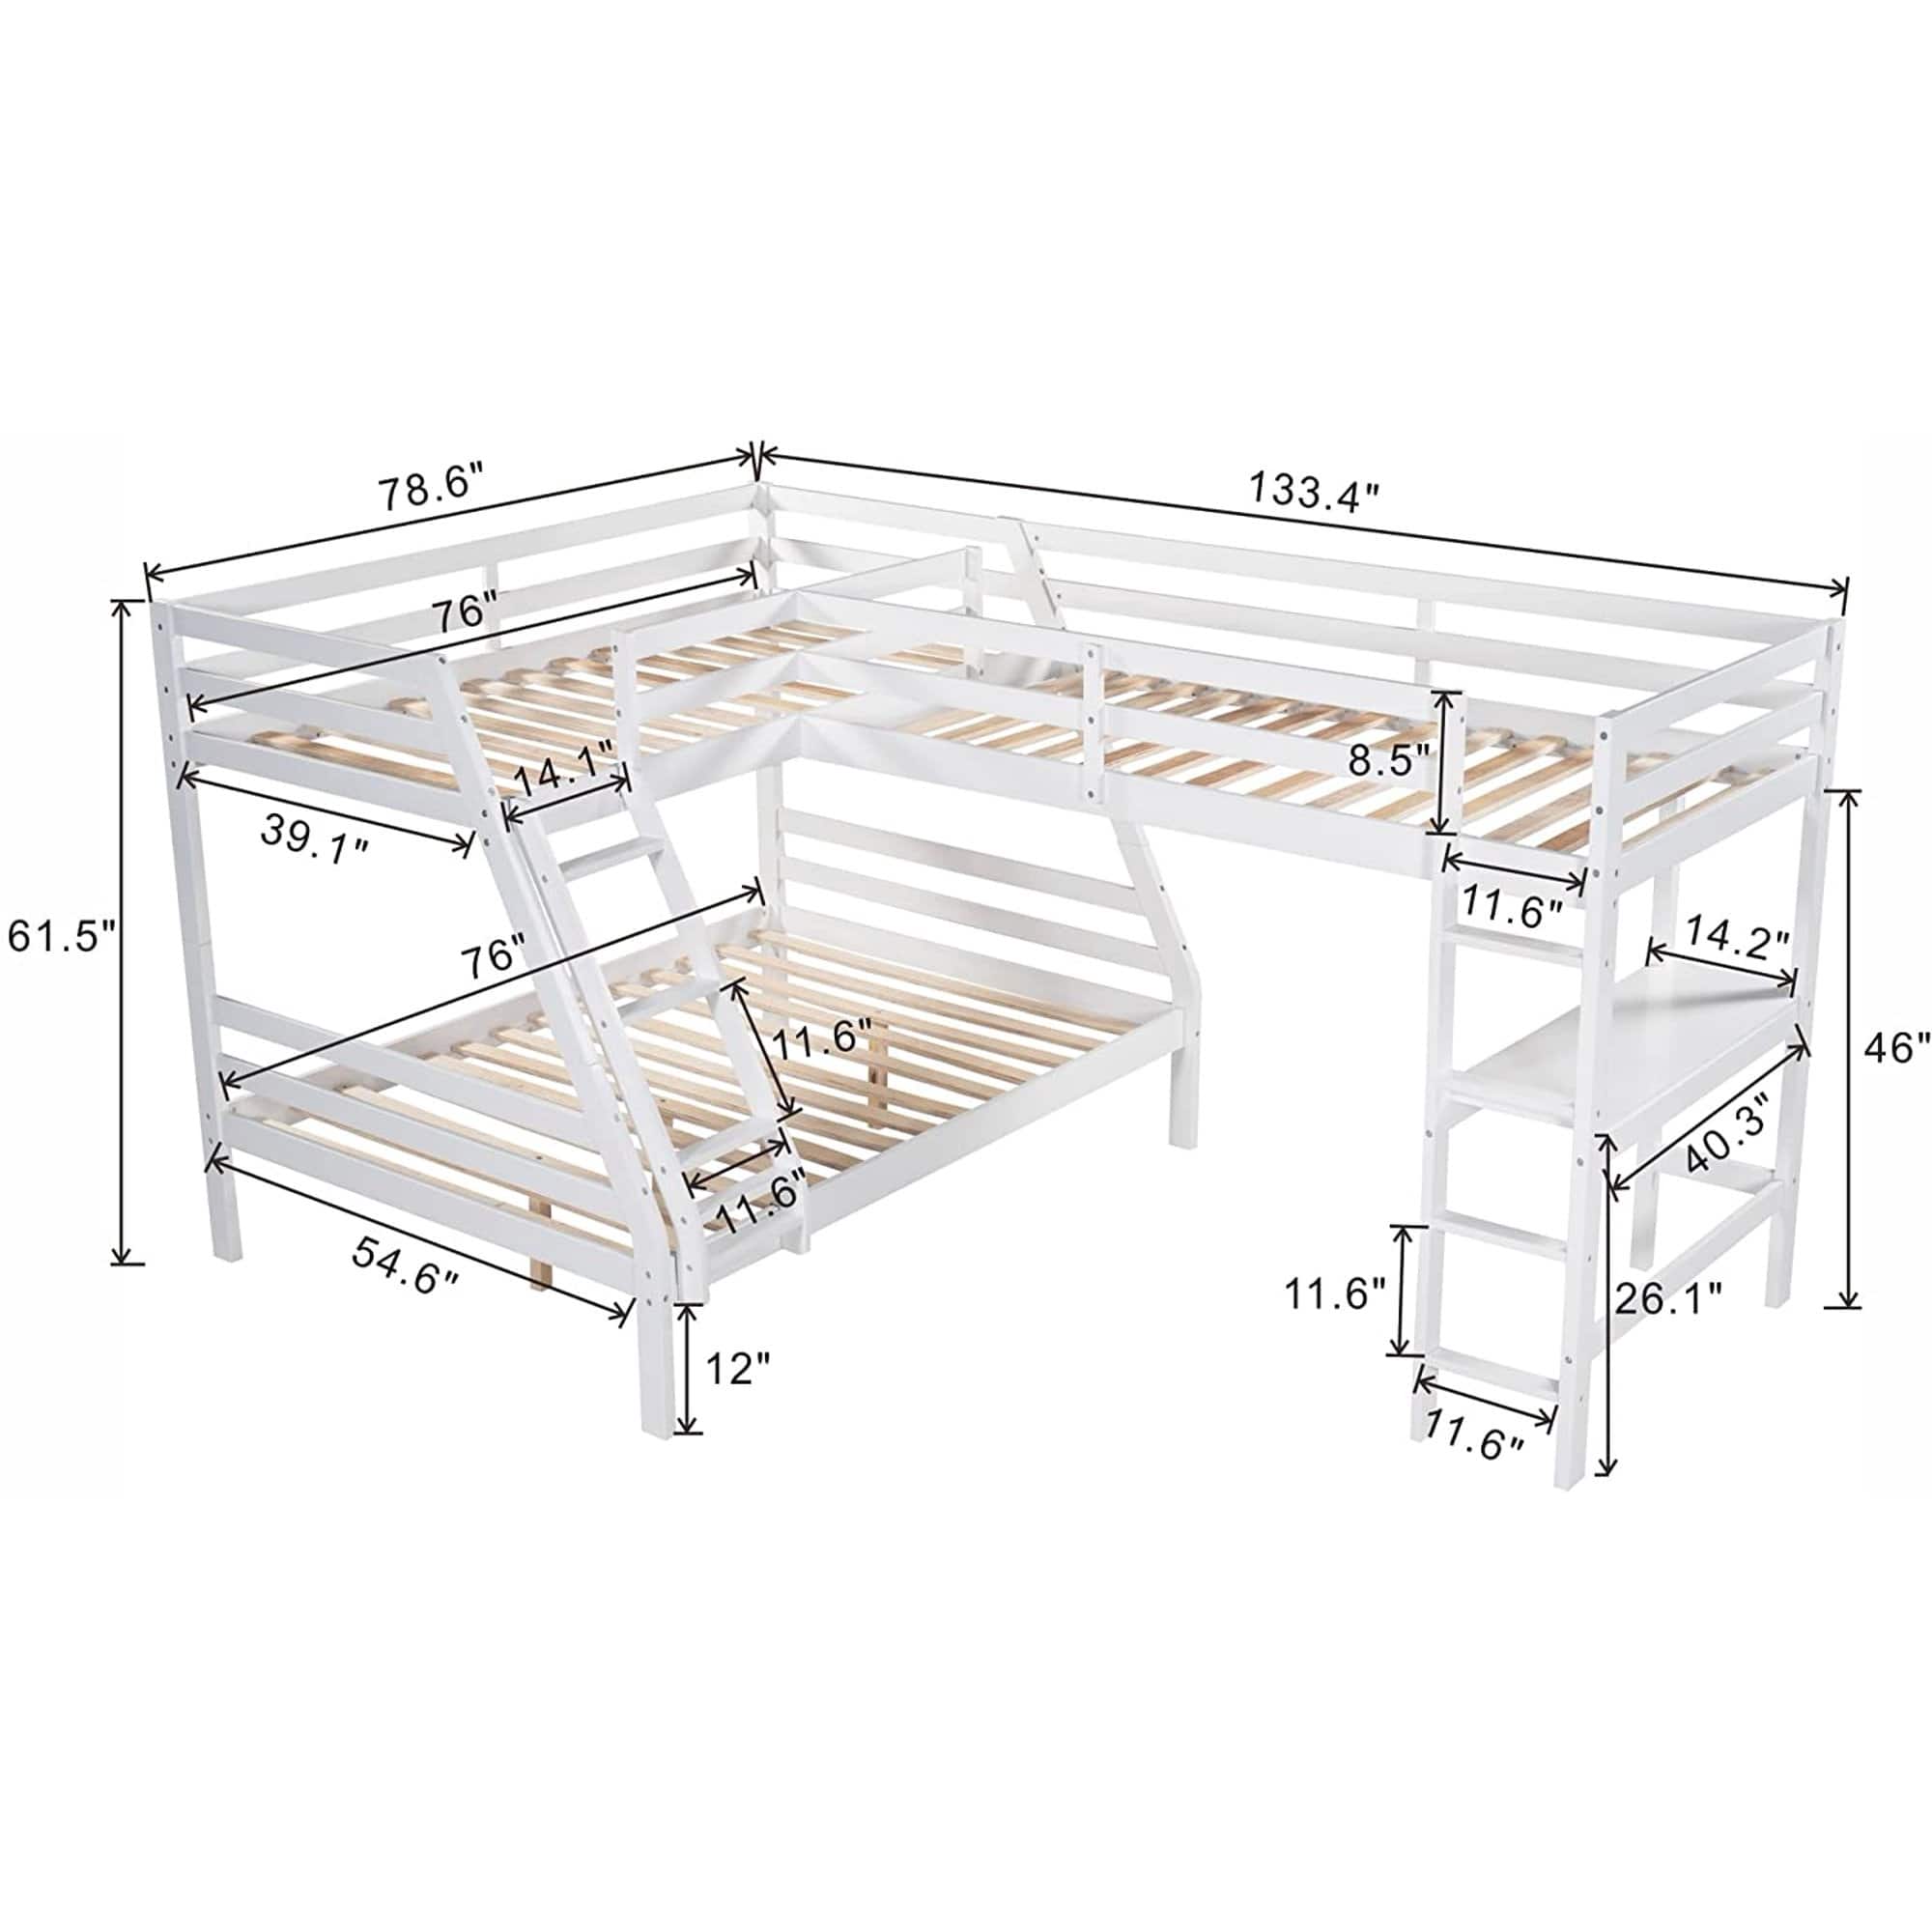 L Shaped Triple Bunk Bed, Twin Over Full Bunk Bed & Twin Loft Bed with Built-in Desk, Wooden Bunk Bed Frame for Kids Teens